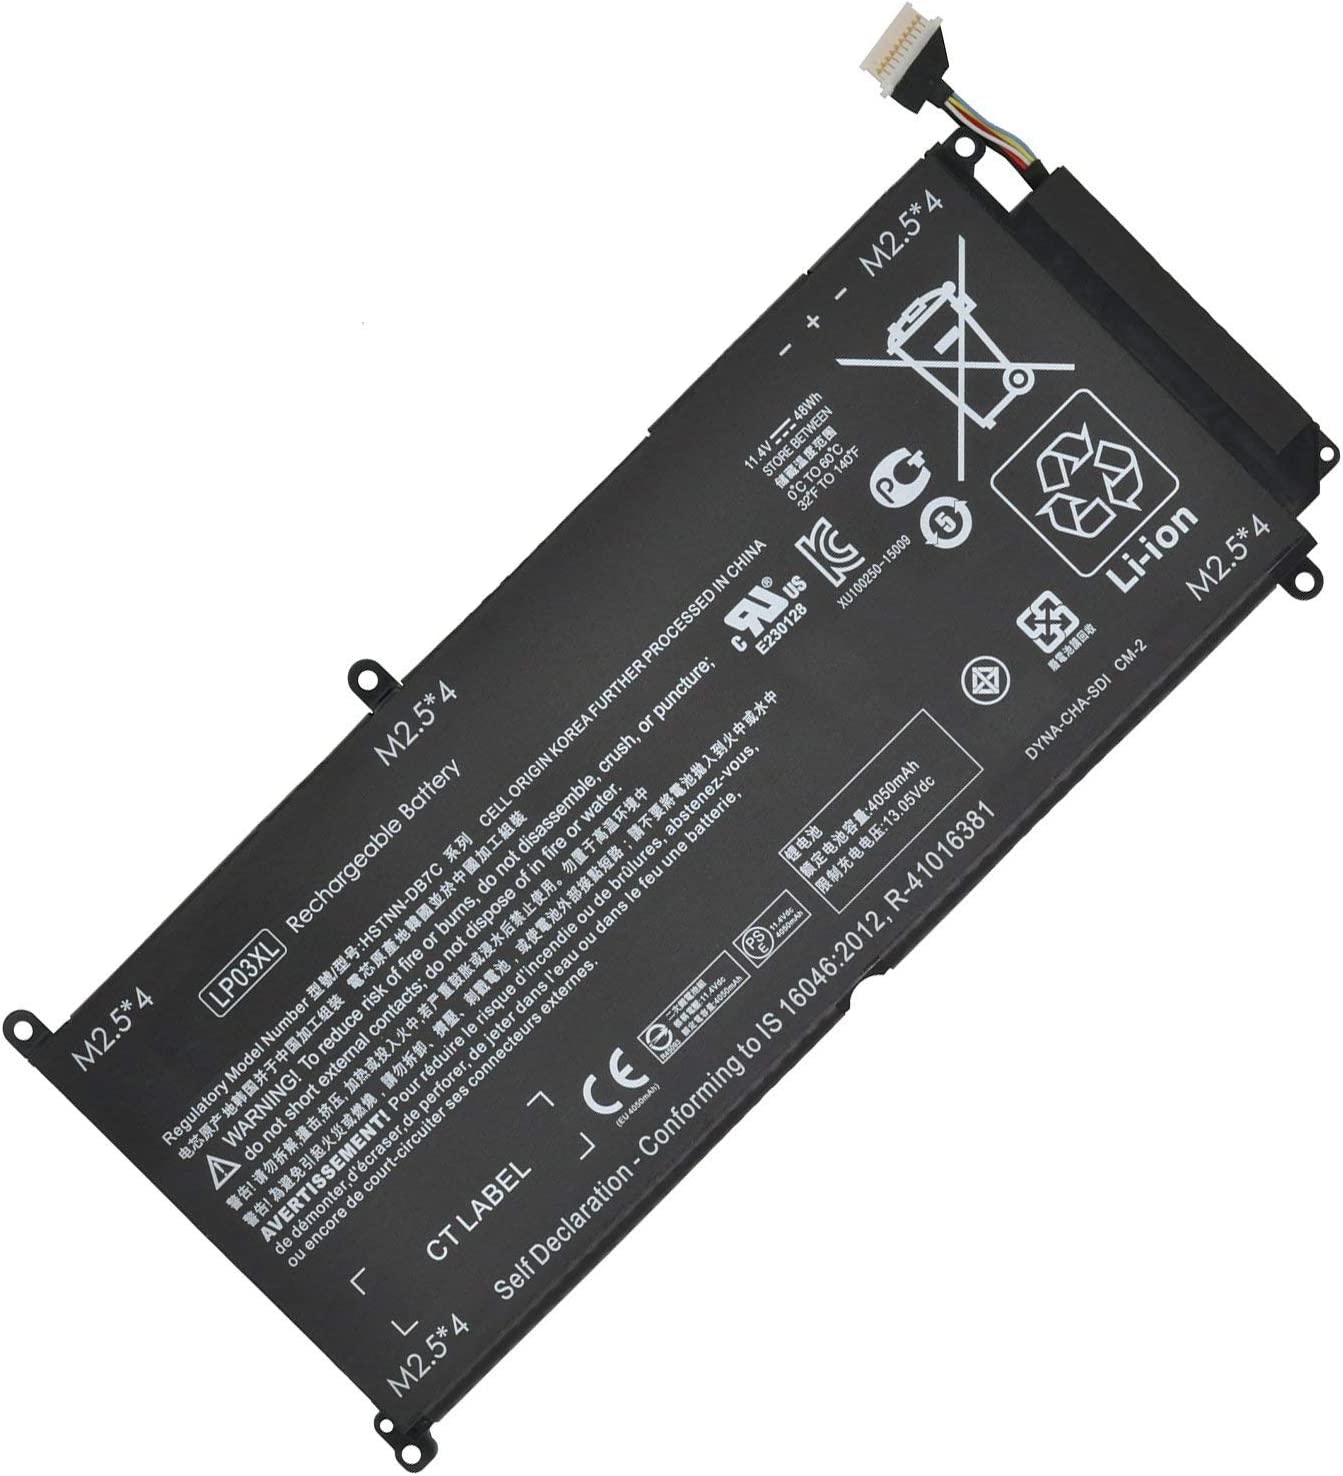 Batería para HP LP03XL Envy M6-P M6-P113DX M6-P 013DX 15T-AE 15T-AE000(compatible)